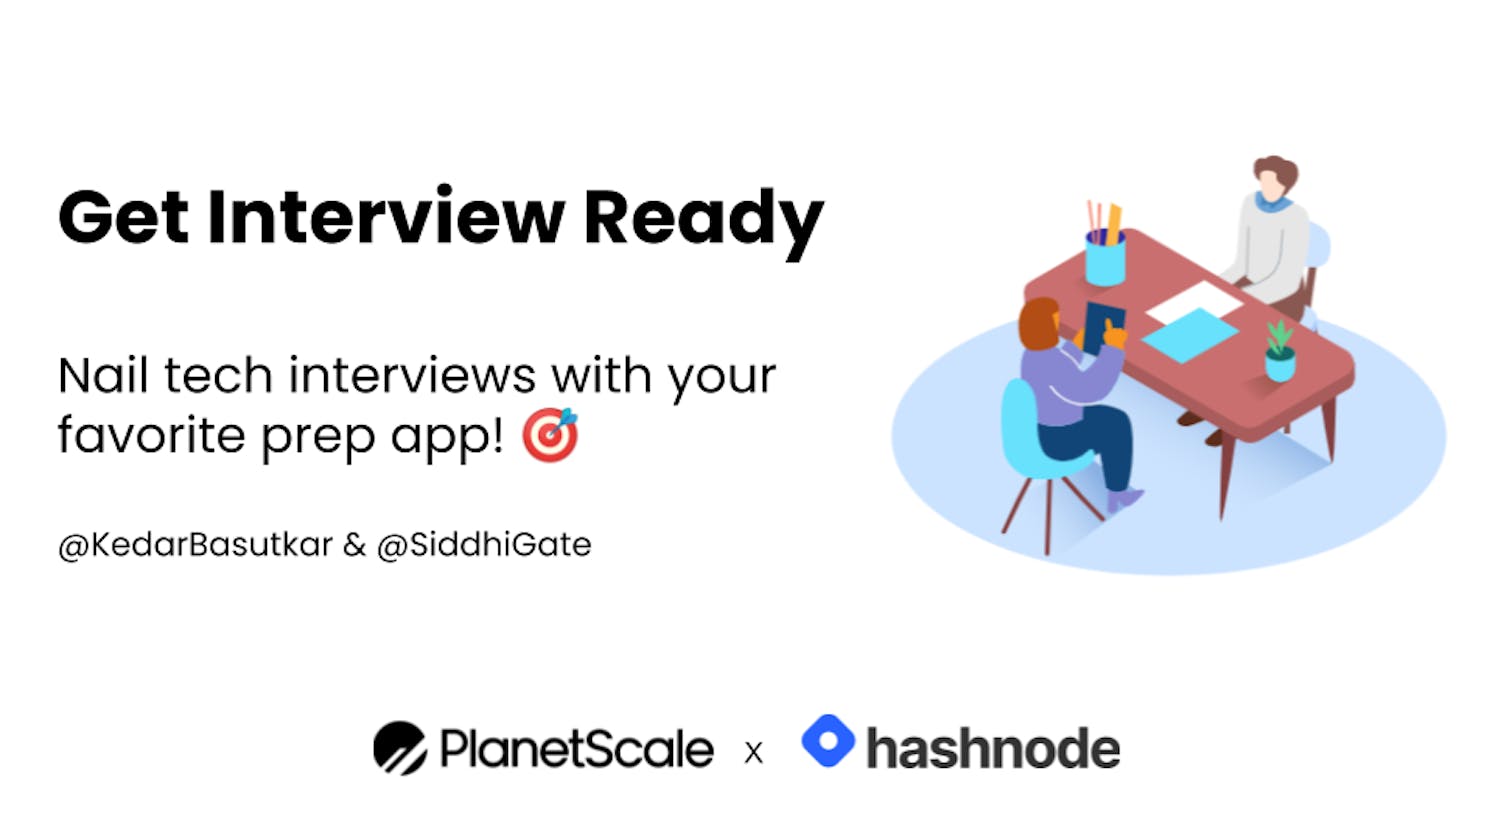 Introducing Get Interview Ready: Nail tech interviews with your favorite prep app! 🎯